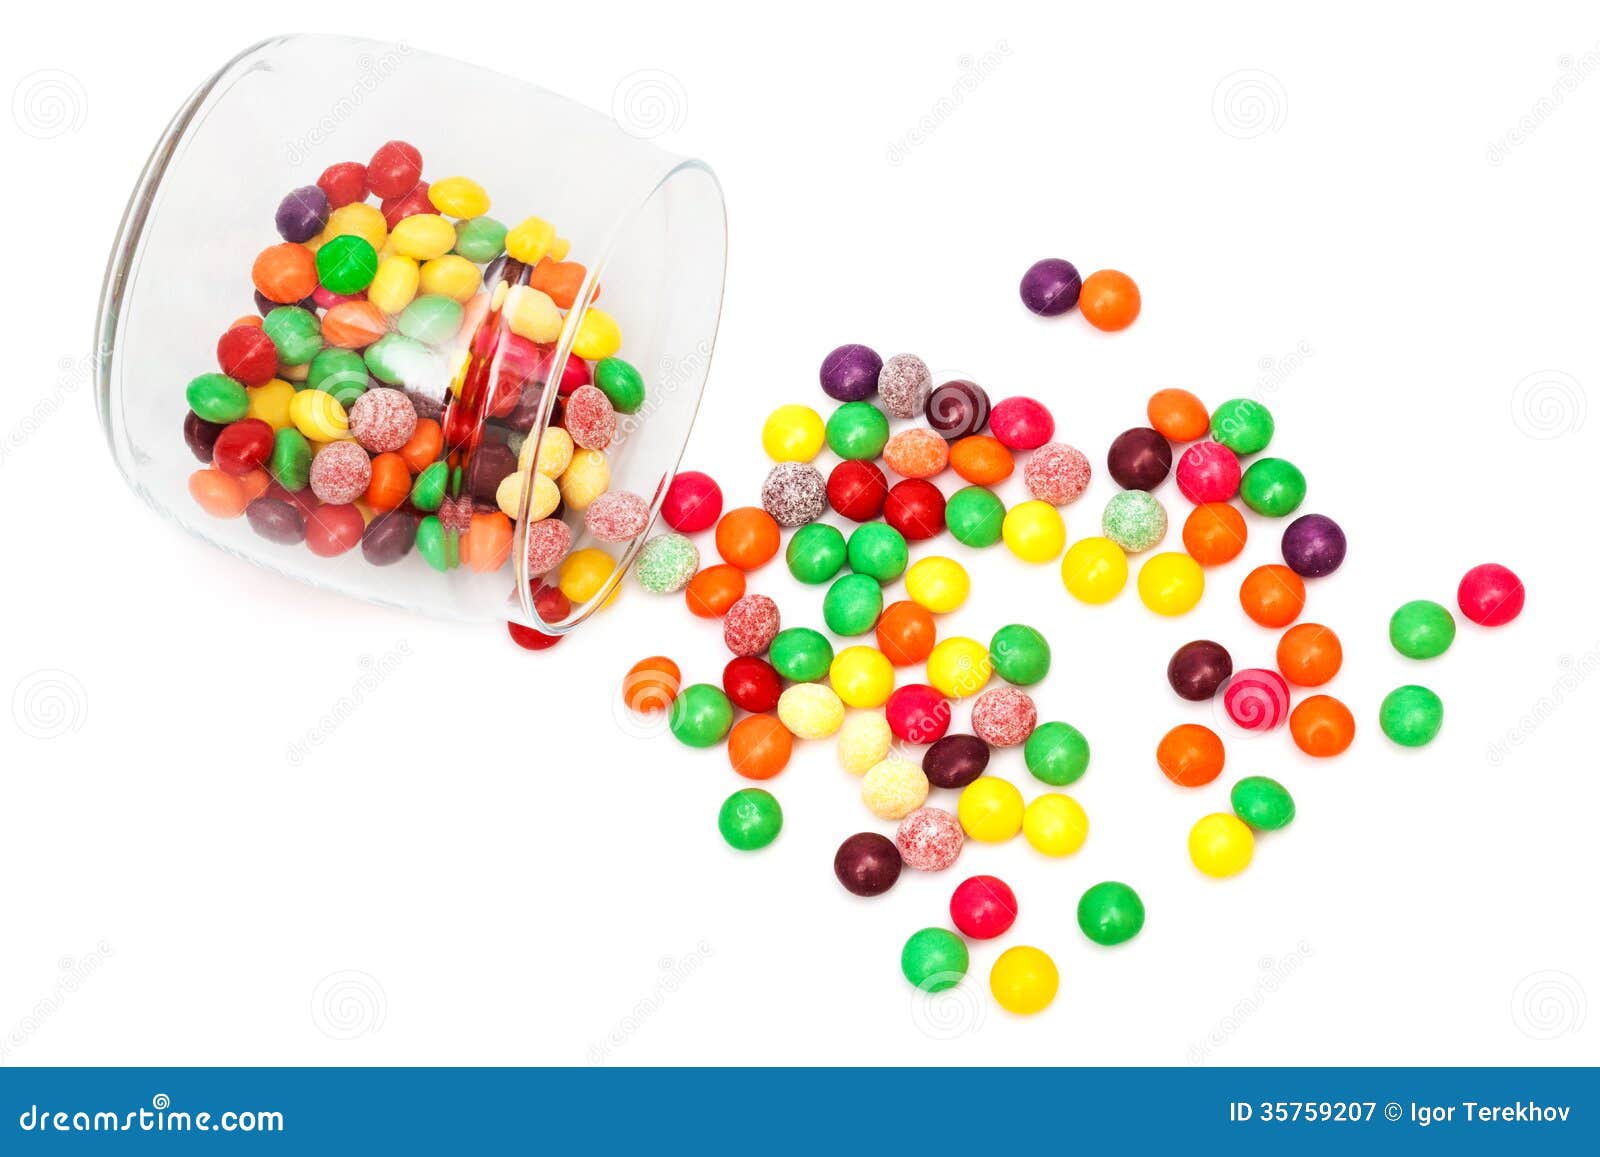 Candy in a jar stock image. Image of pink, colored, horizontal - 35759207